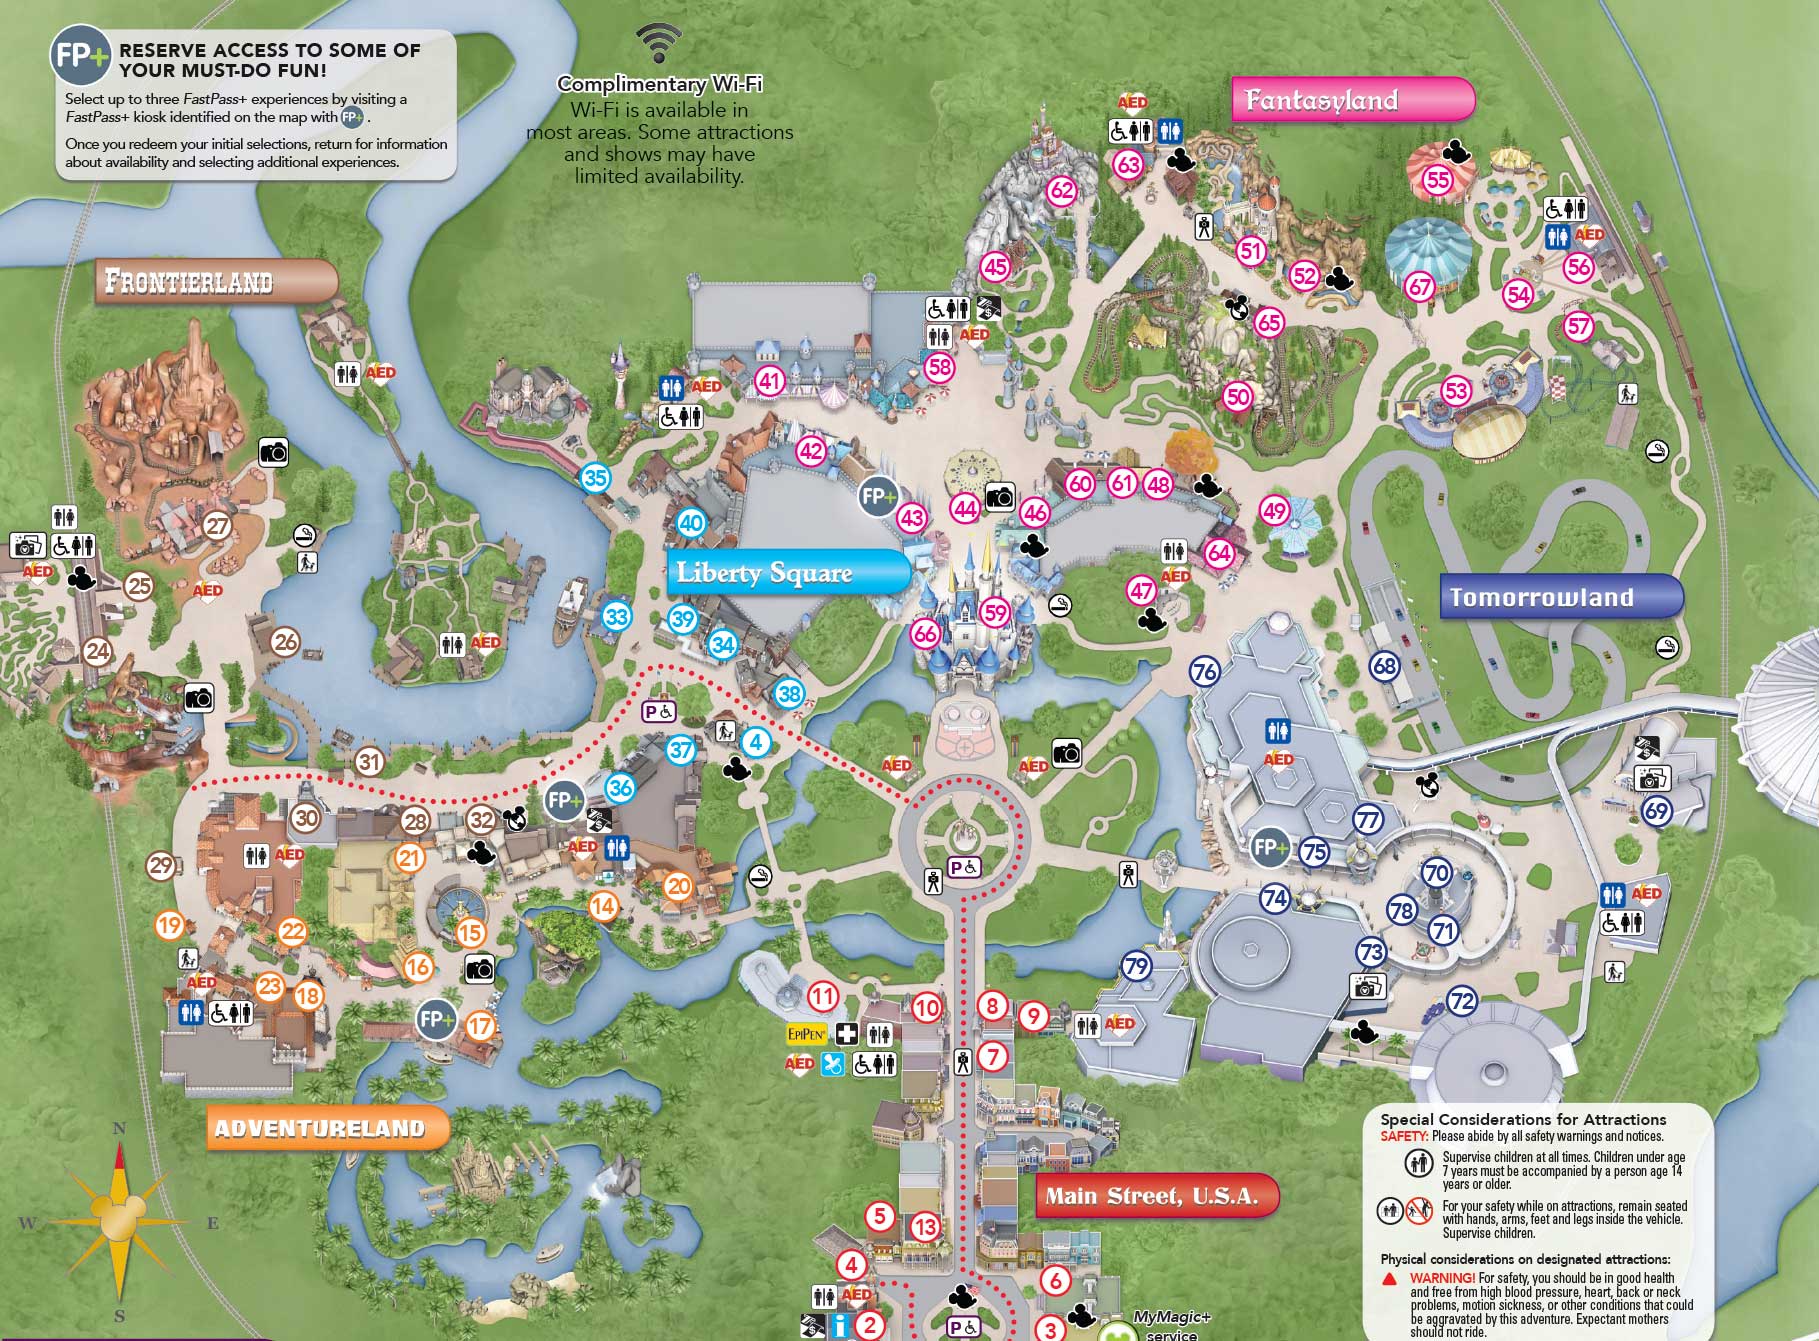 new-magic-kingdom-guide-map-shows-new-plaza-gardens-photo-1-of-2